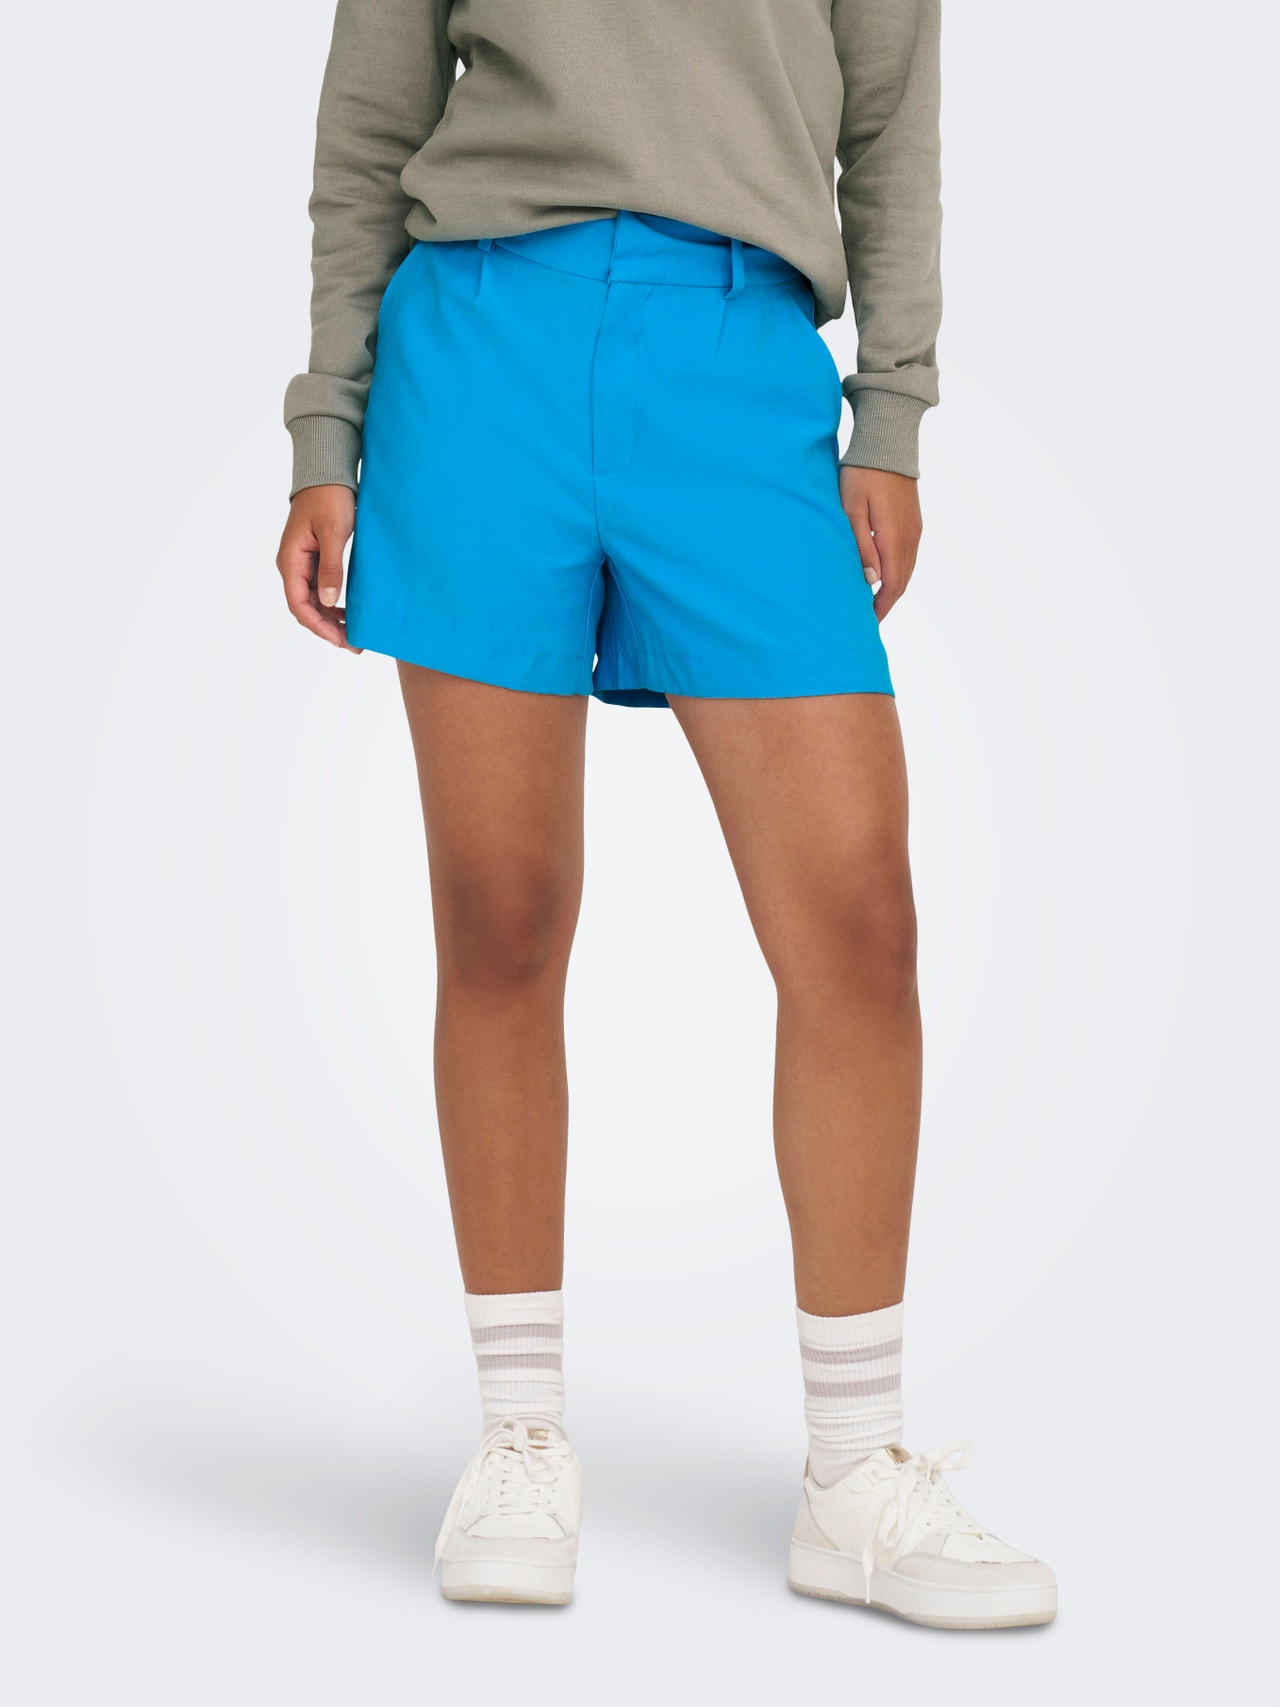 Loose shorts with high waist with 30% discount!